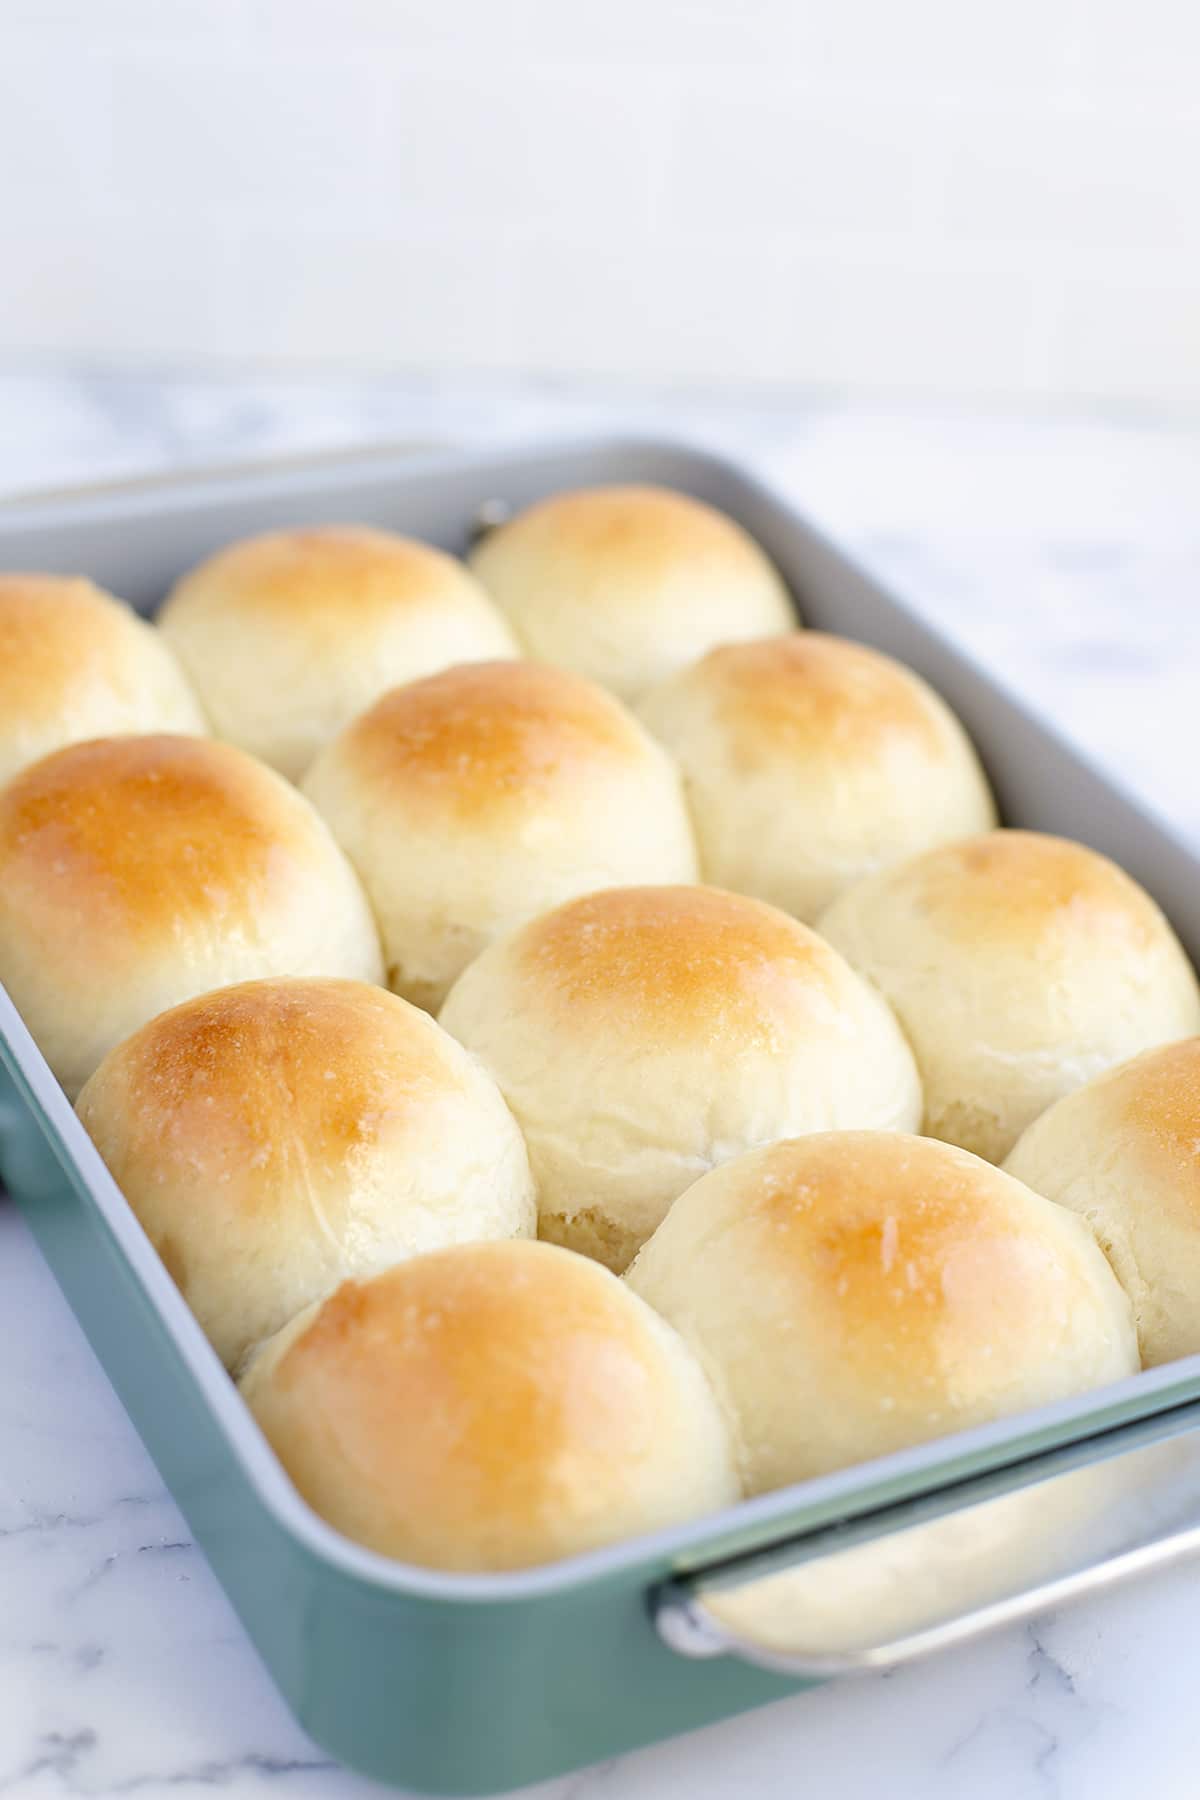 A close up shot of golden brown homemade dinner rolls in a green metal baking pan on a marble countertop.